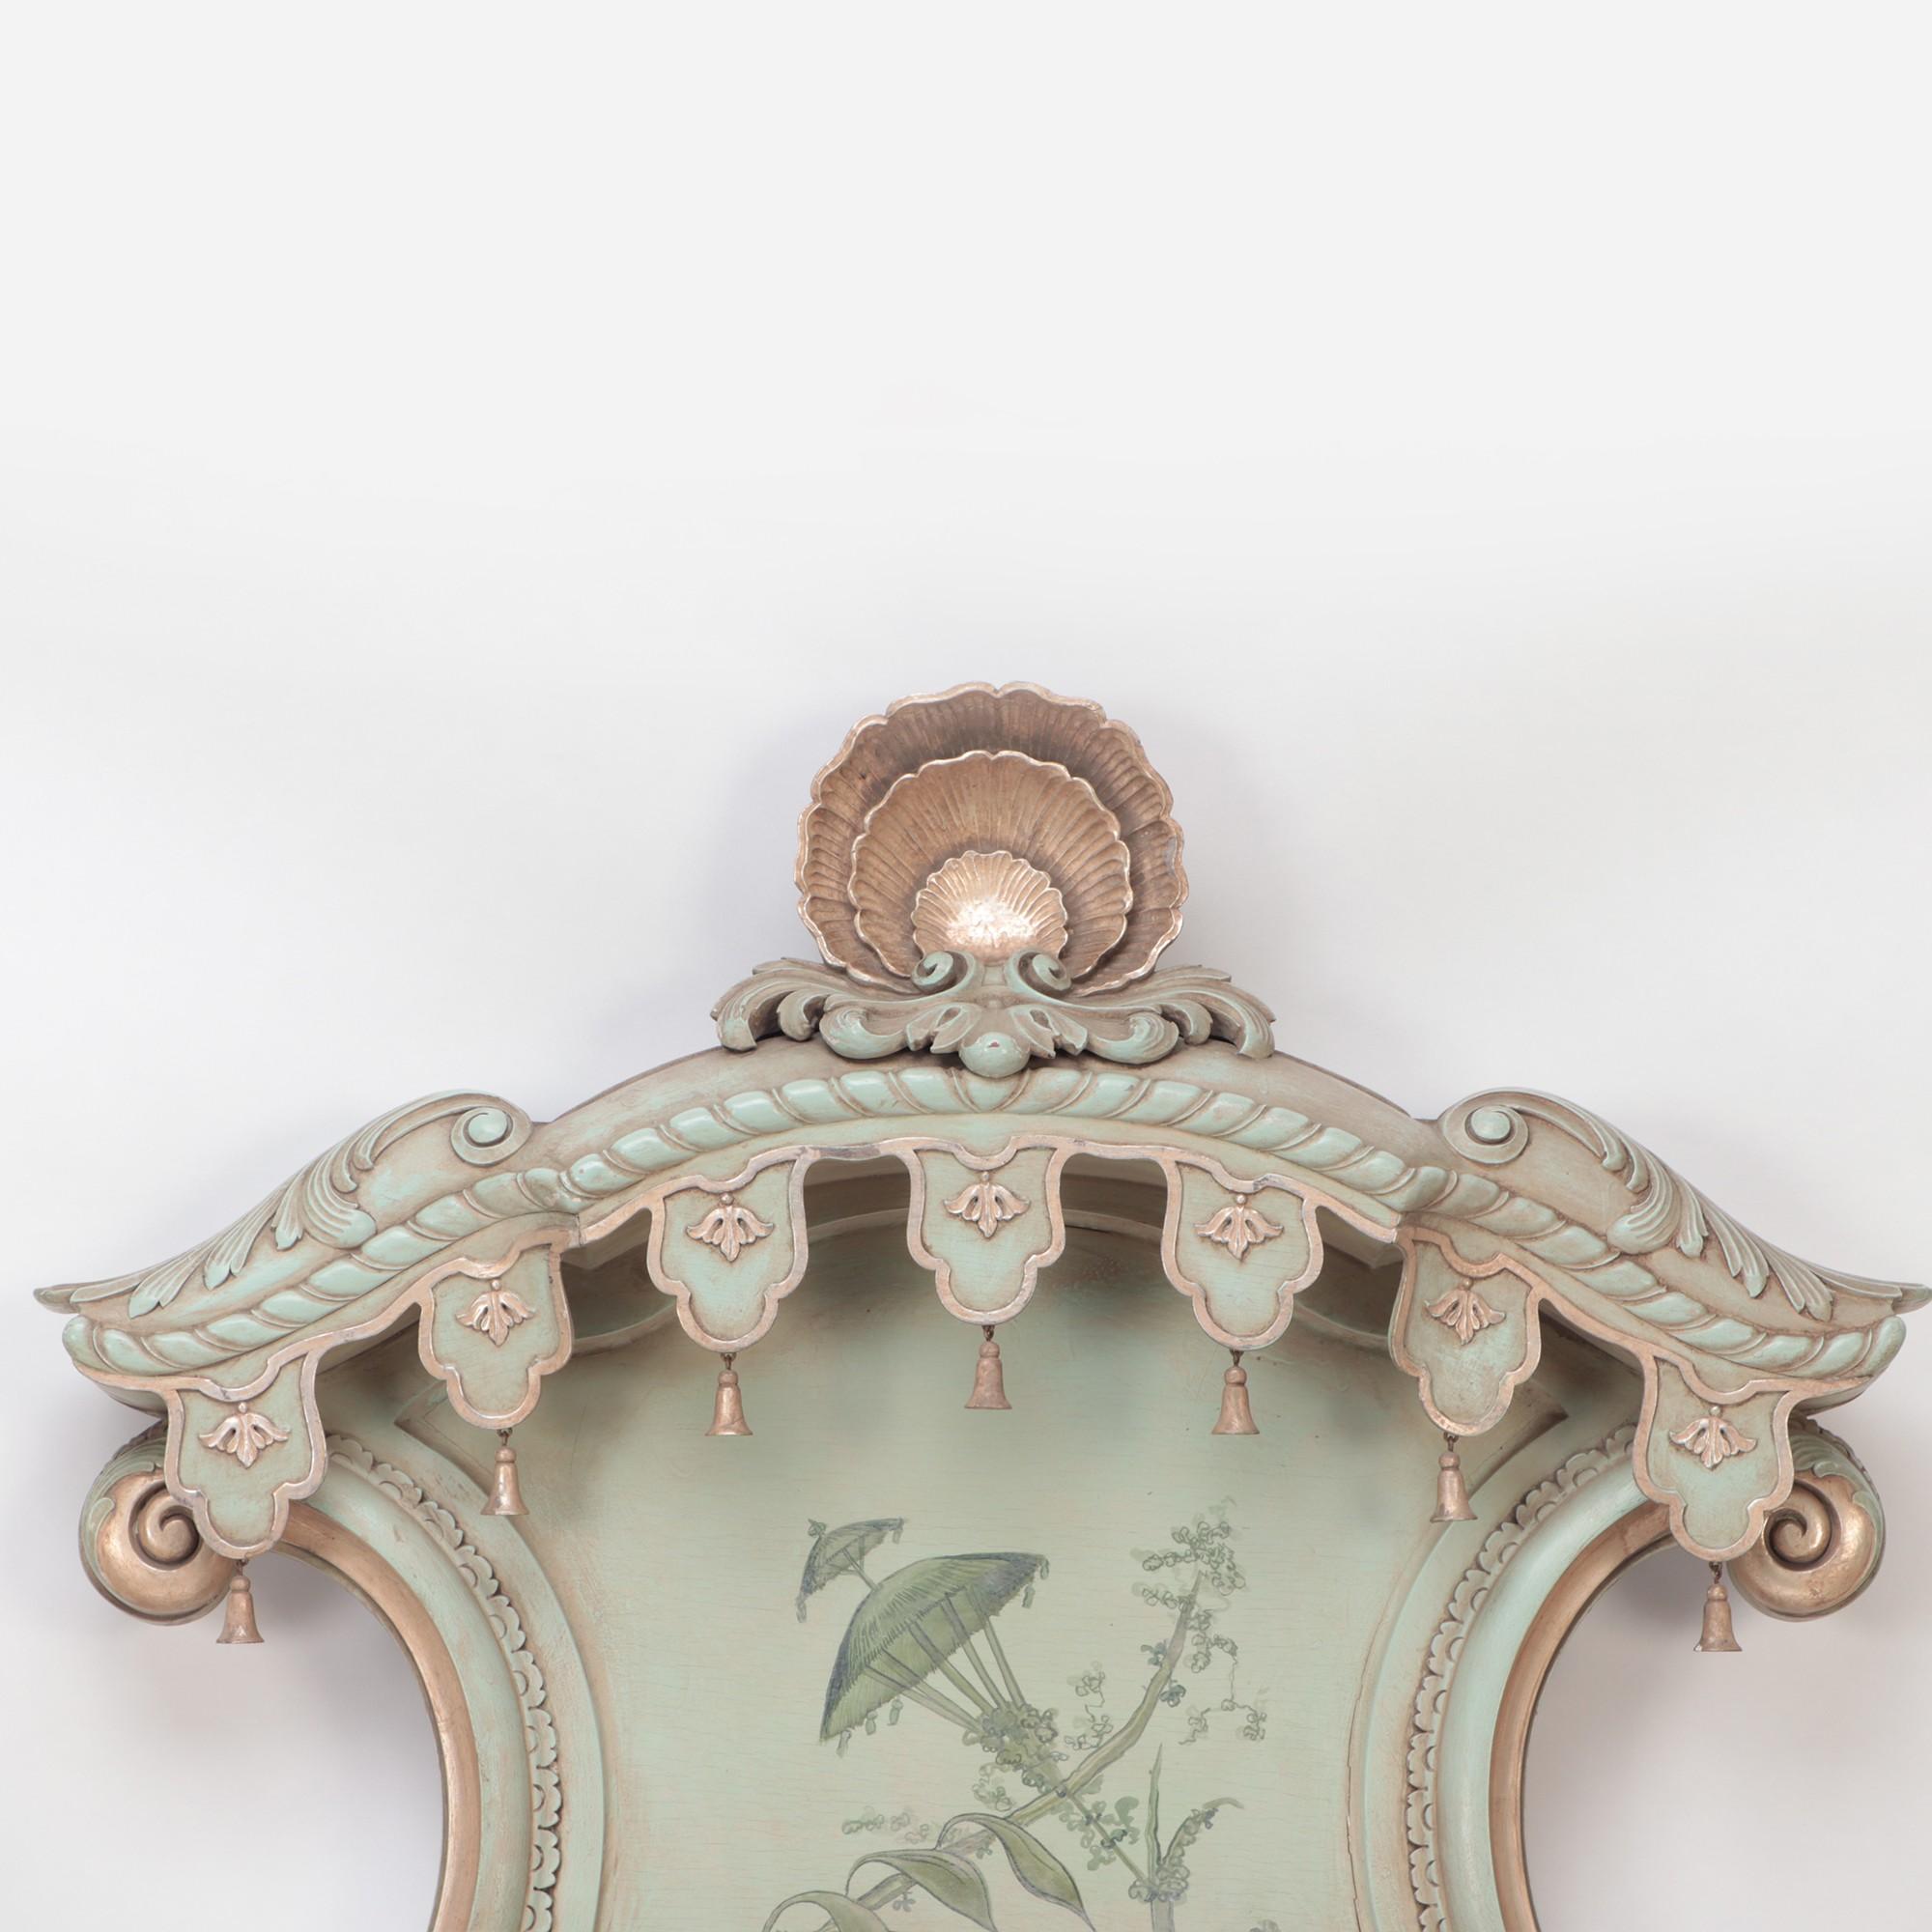 A beautiful Italian Venetian-style carved and antique green painted shaped headboard with floral leaf decoration. Circa 1950.